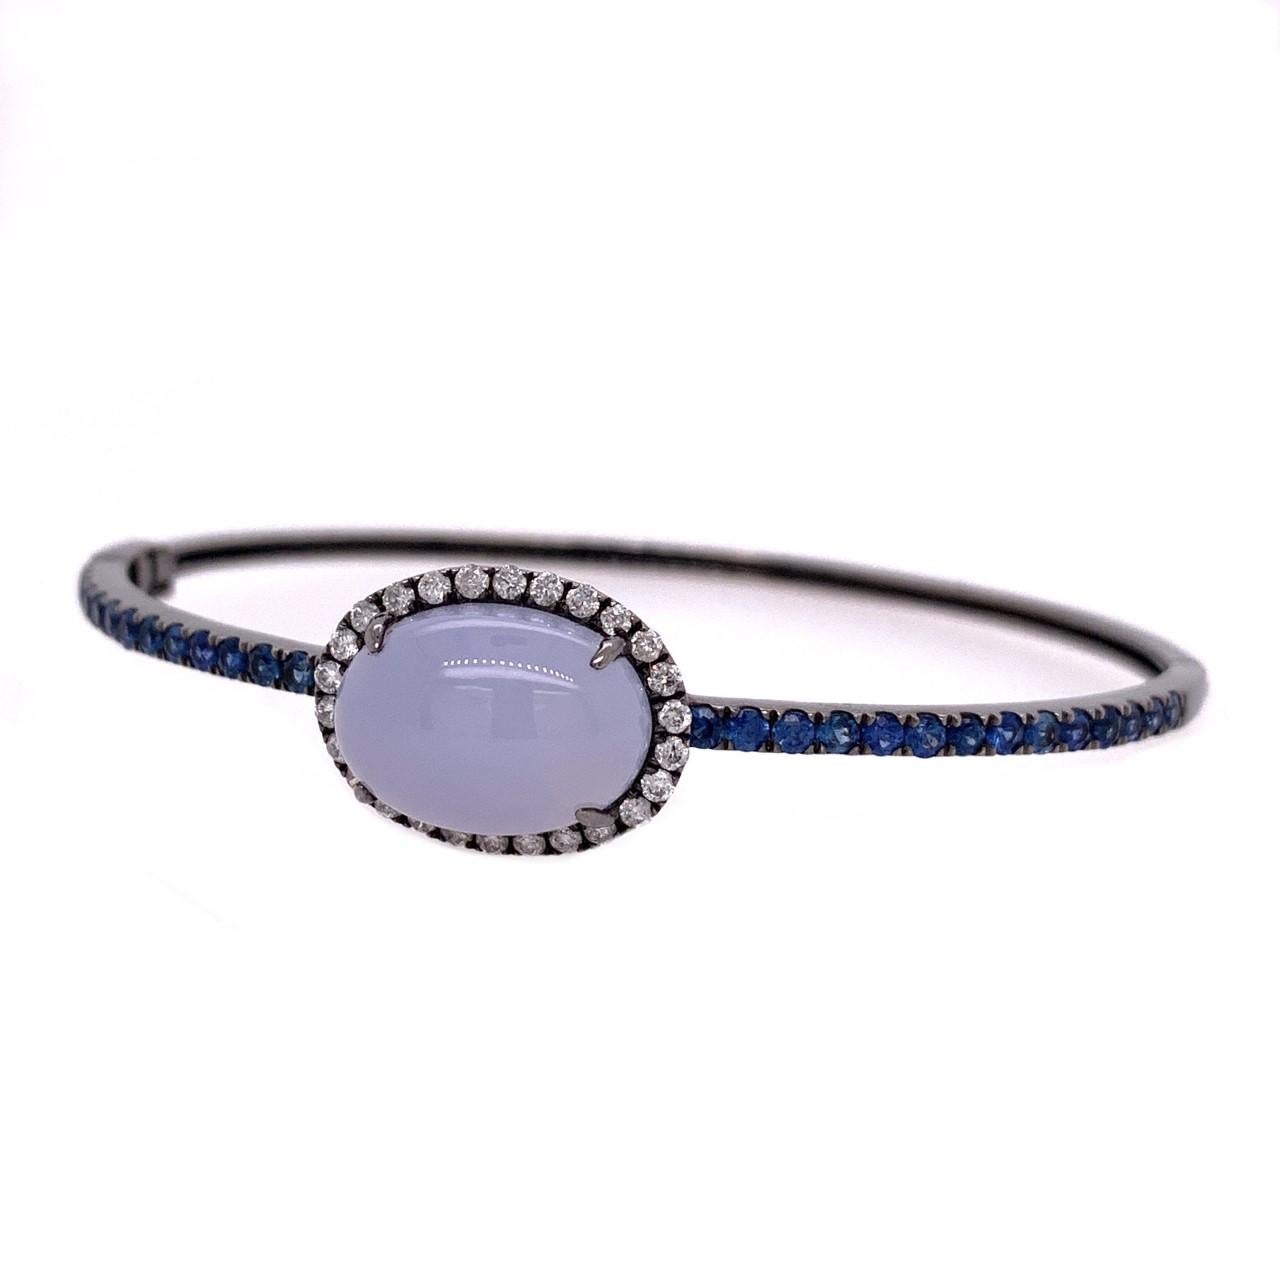 Midnight Blue Collection

Enchanting Chalcedony cabochon with Diamond halo and Sapphire bangle in 18 karat black rhodium gold. 

Chalcedony: 6.79ct total weight.
Blue Sapphire: 1.11ct total weight.
Diamonds: 0.36ct total weight. 
All diamonds are